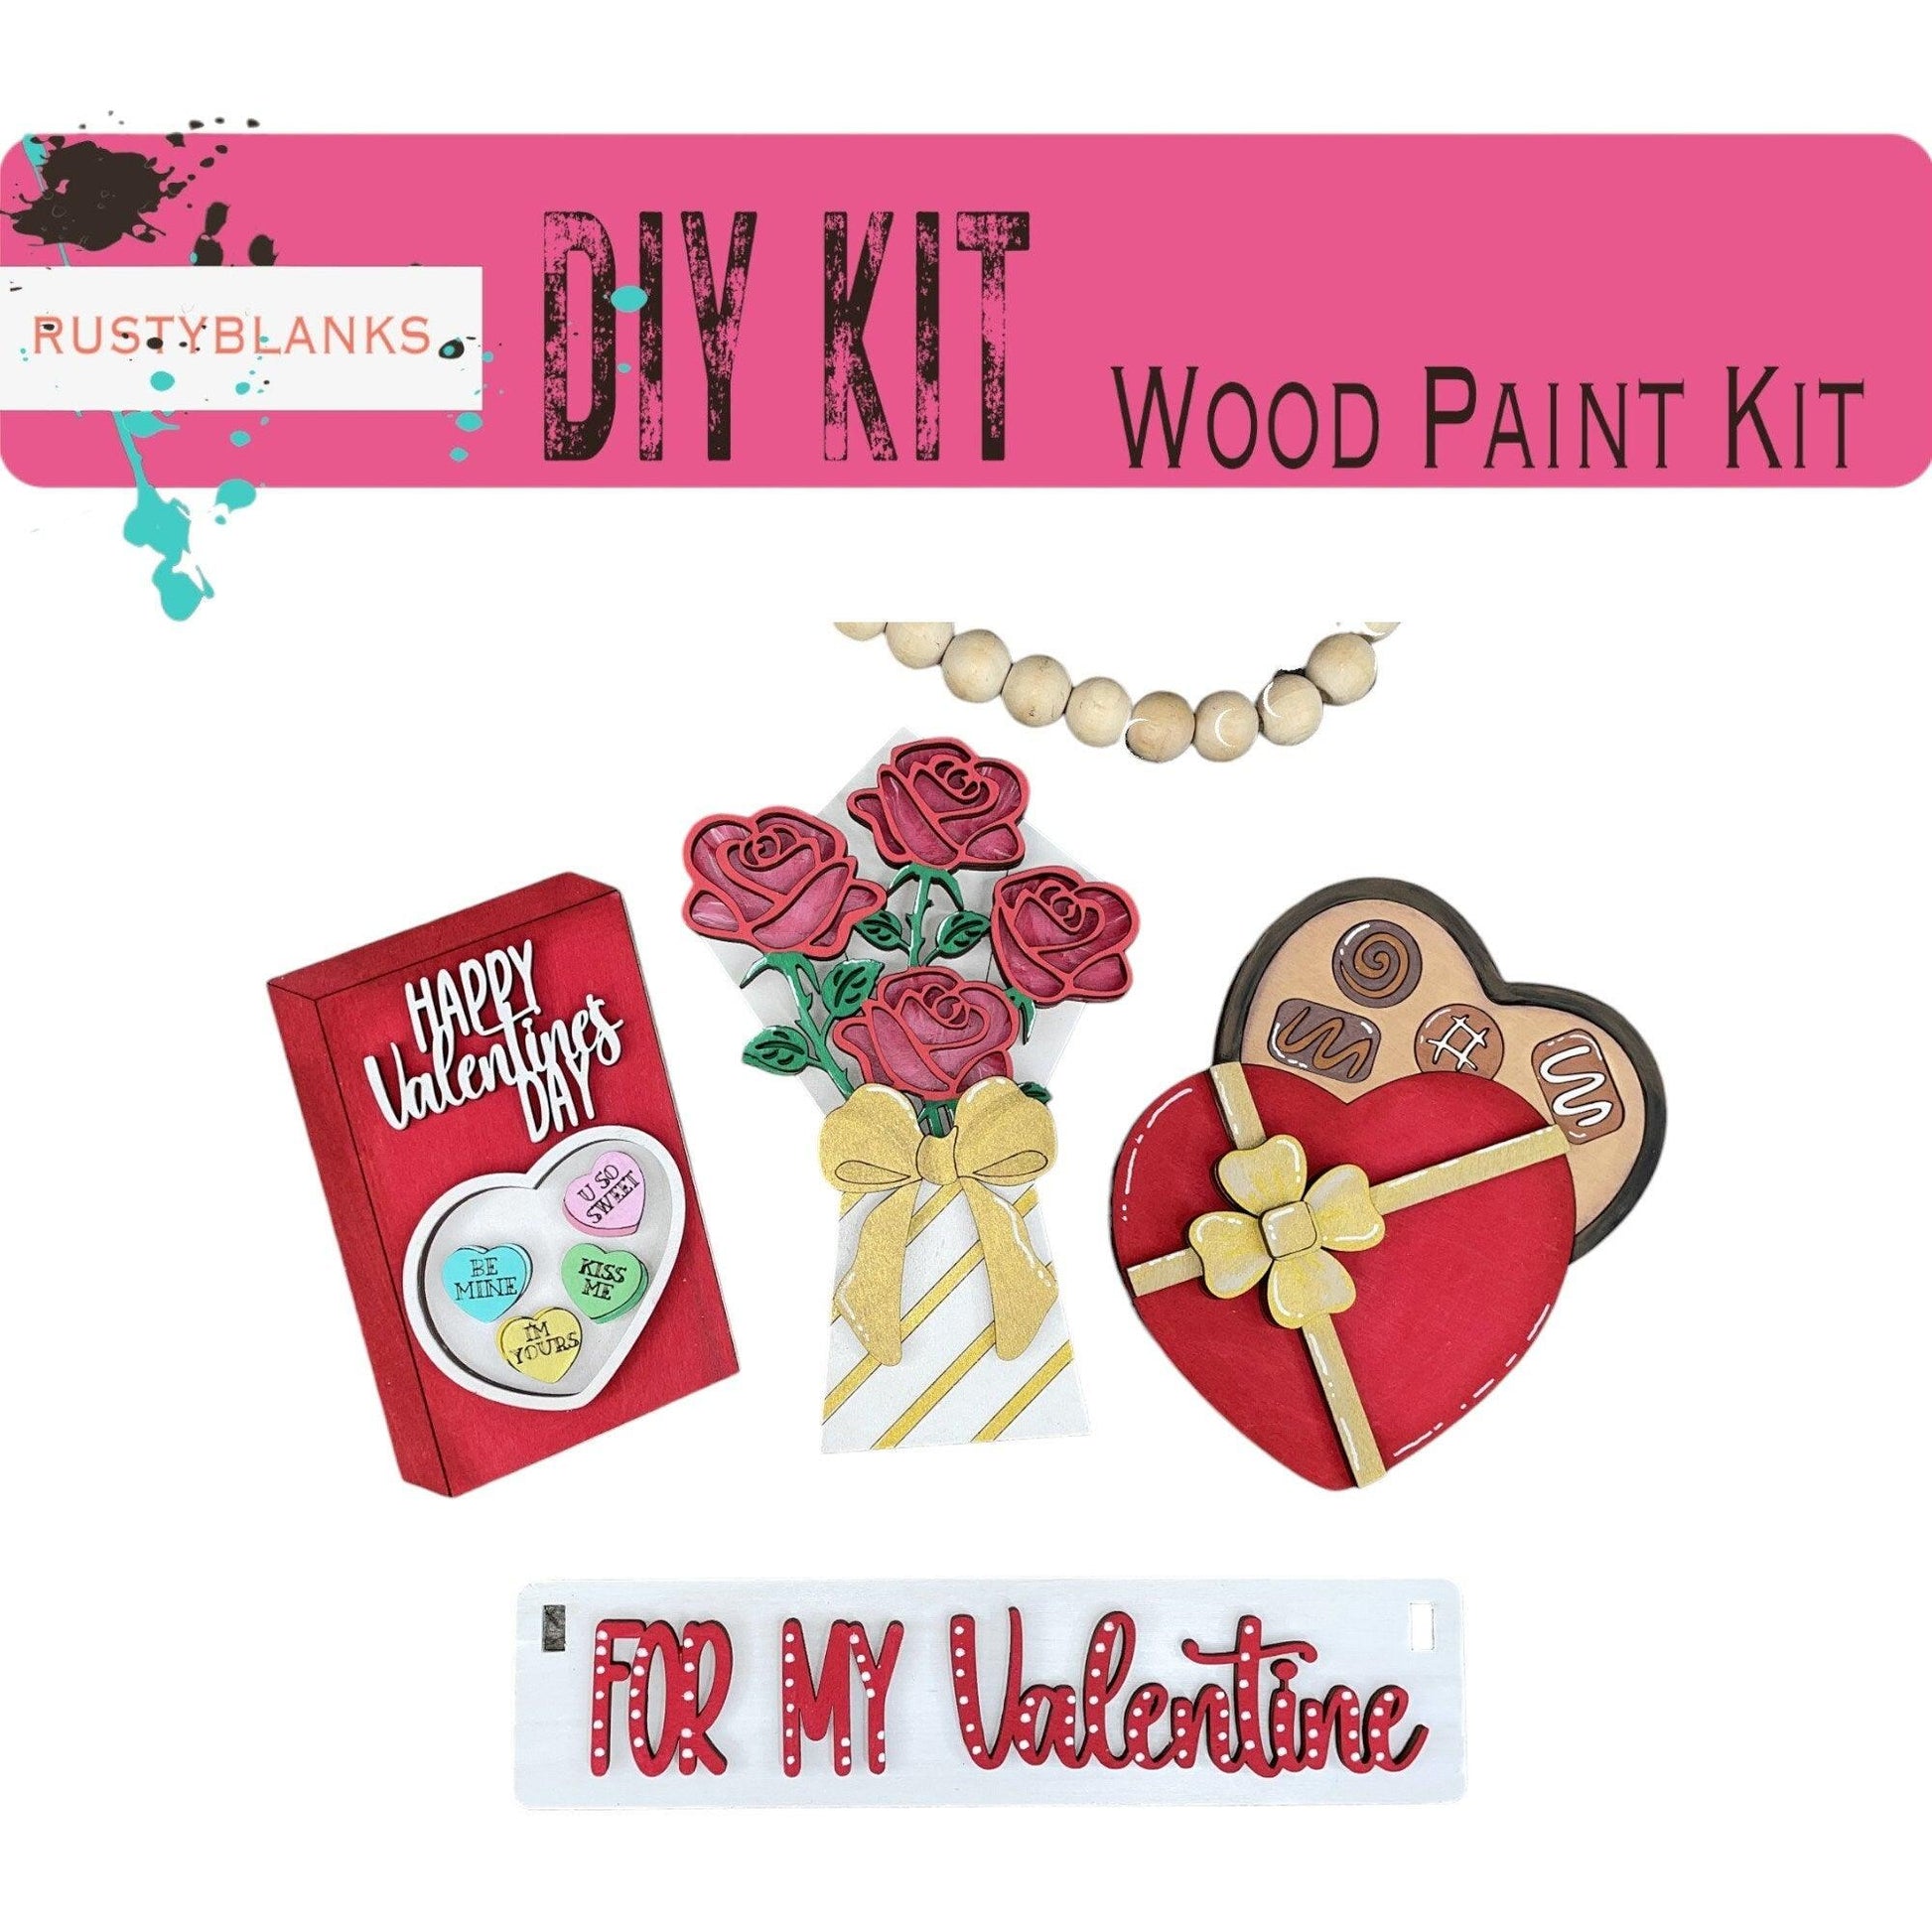 For My Valentine Insert for Wagon or Raised Shelf Sitter, Unfinished DIY Wood Kit, Blanks to Decorate Home Decor, DIY Wagon - RusticFarmhouseDecor